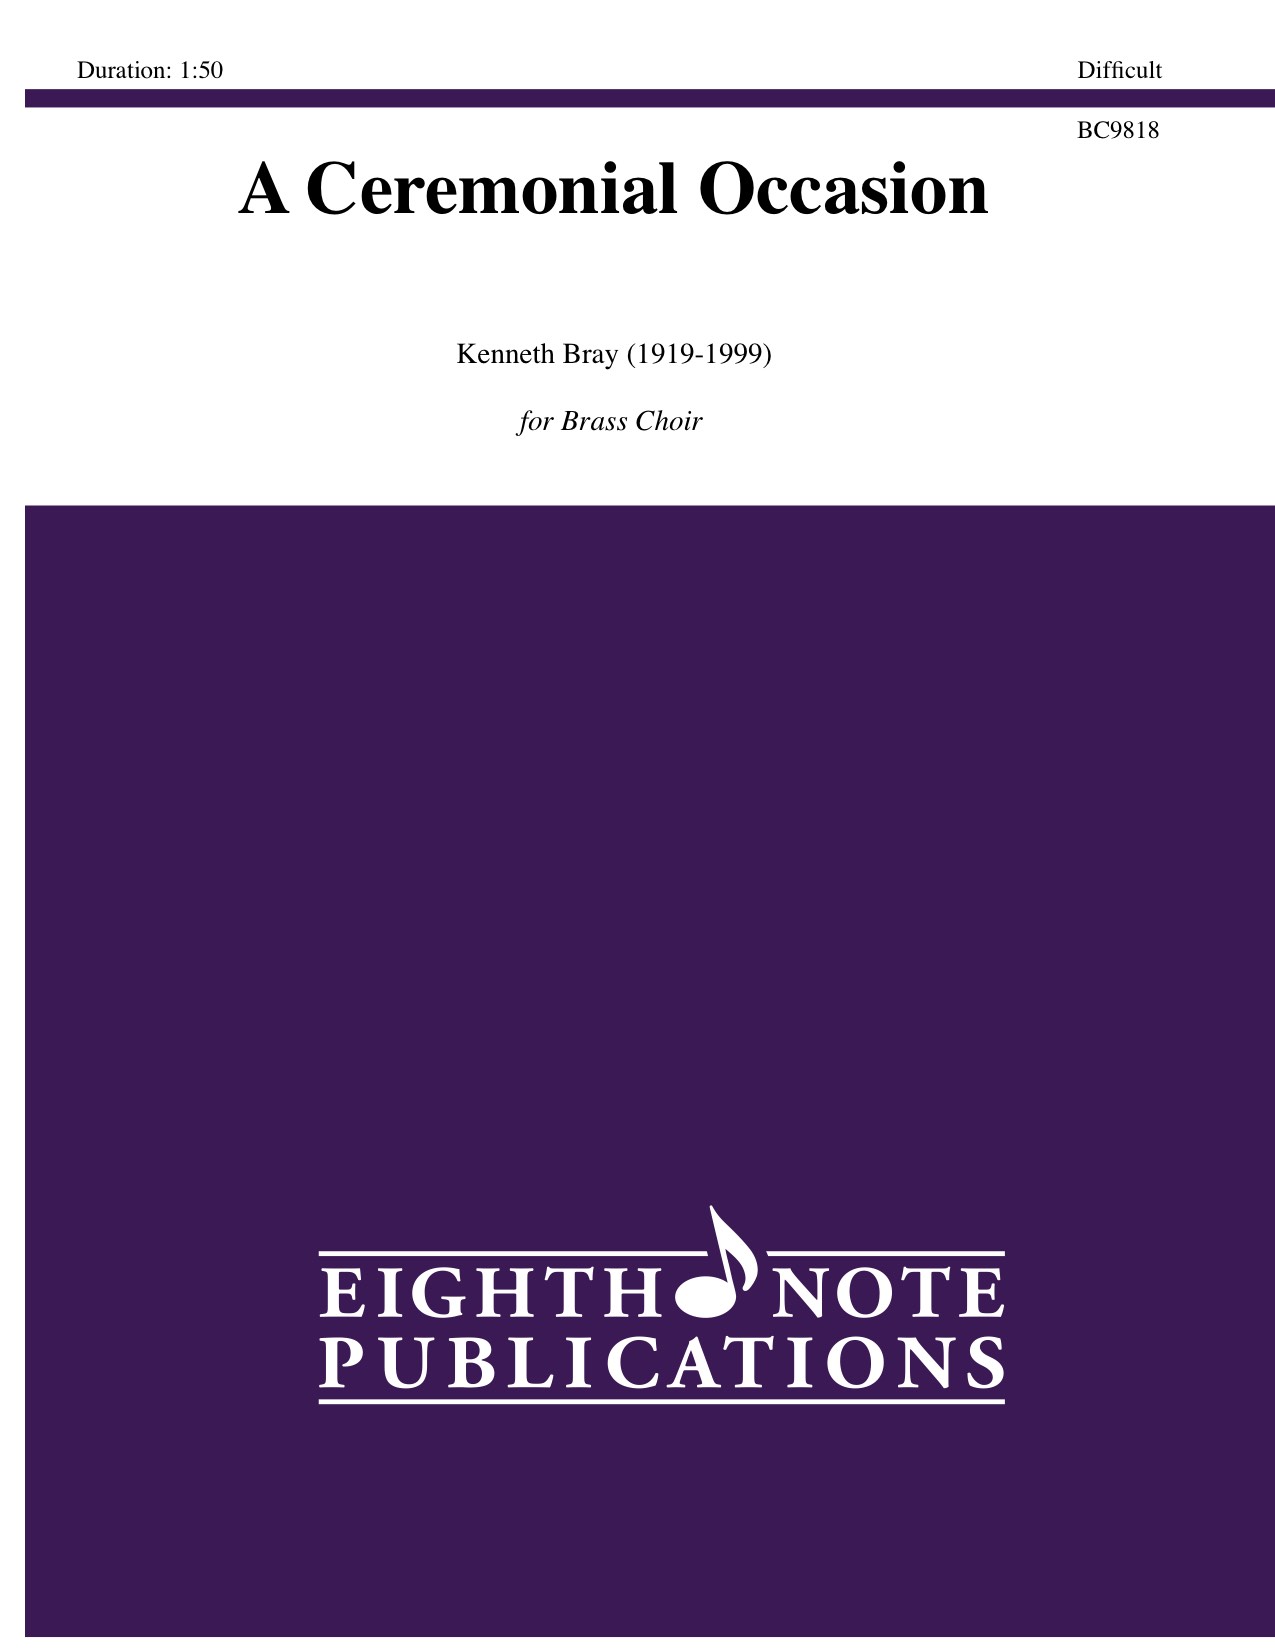 Ceremonial Occasion, A - Kenneth Bray